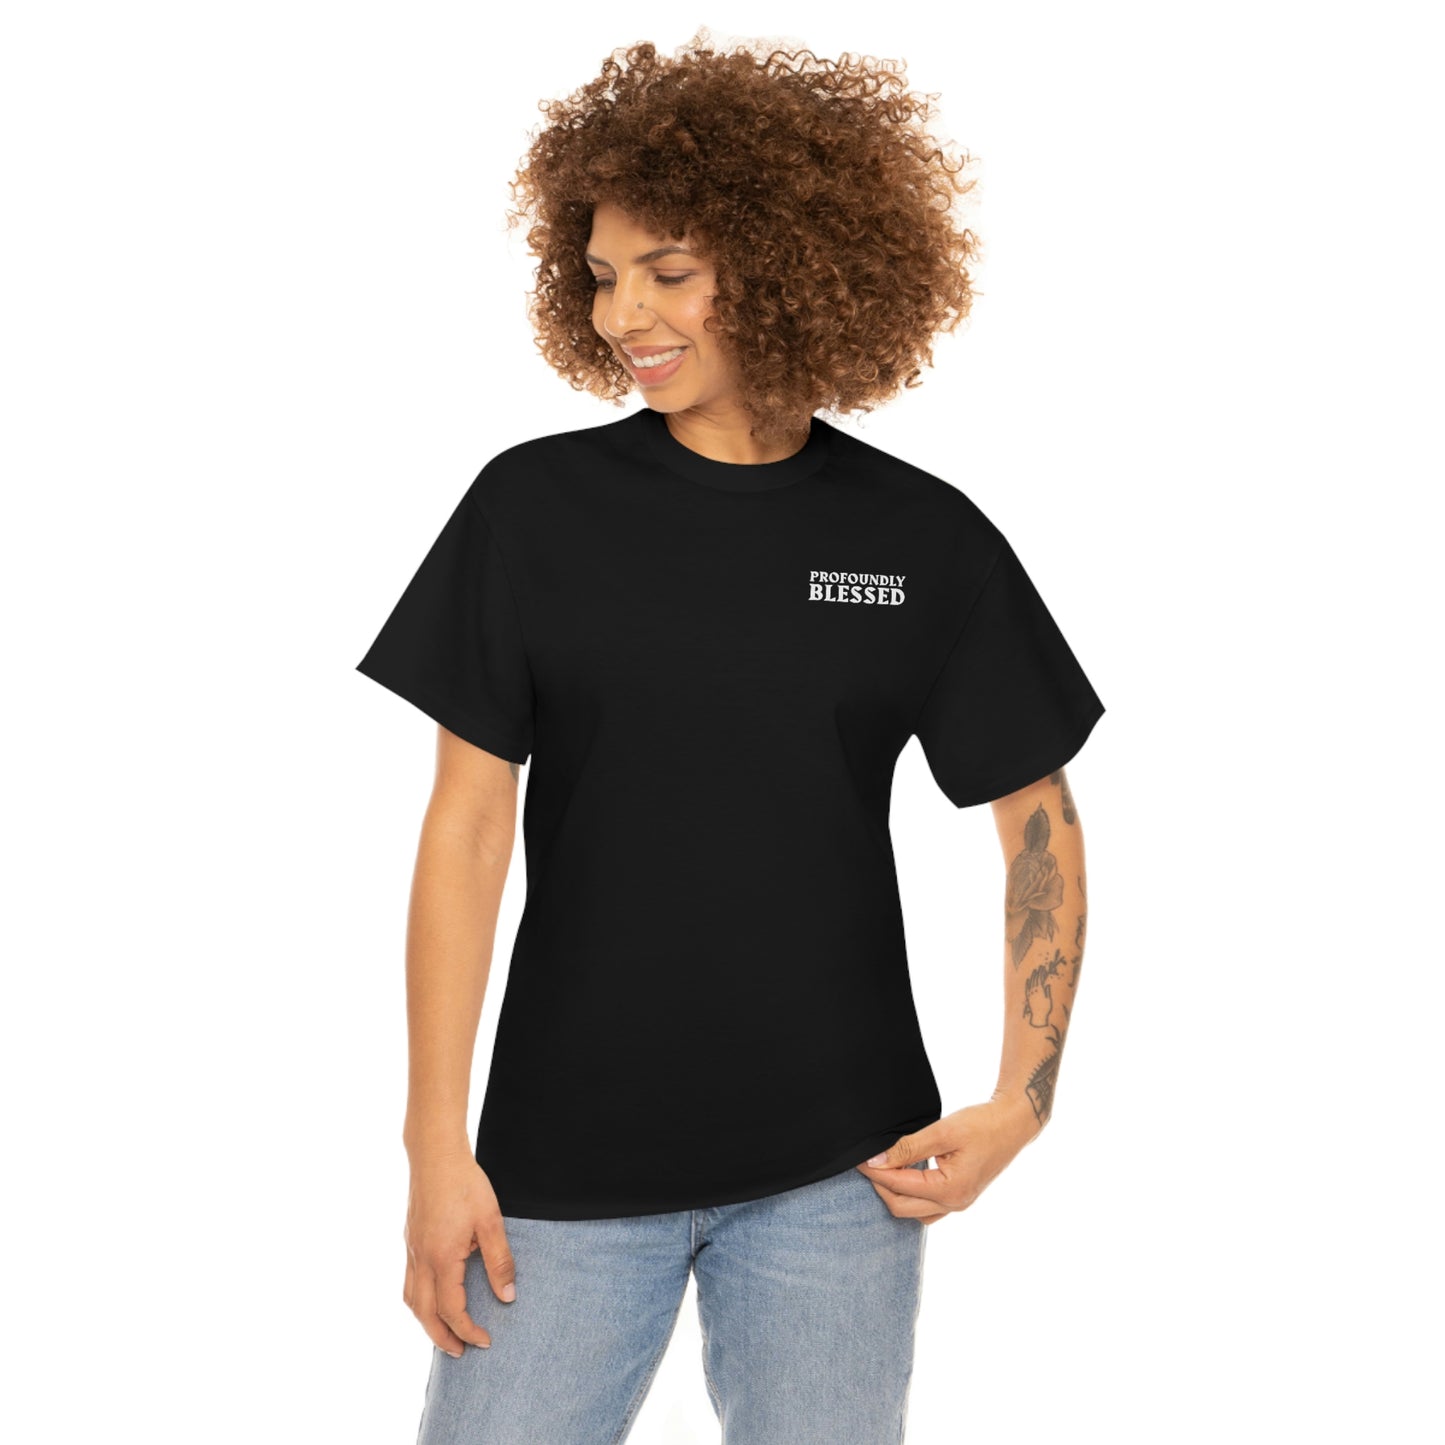 Profoundly Blessed Unisex Heavy Cotton Tee